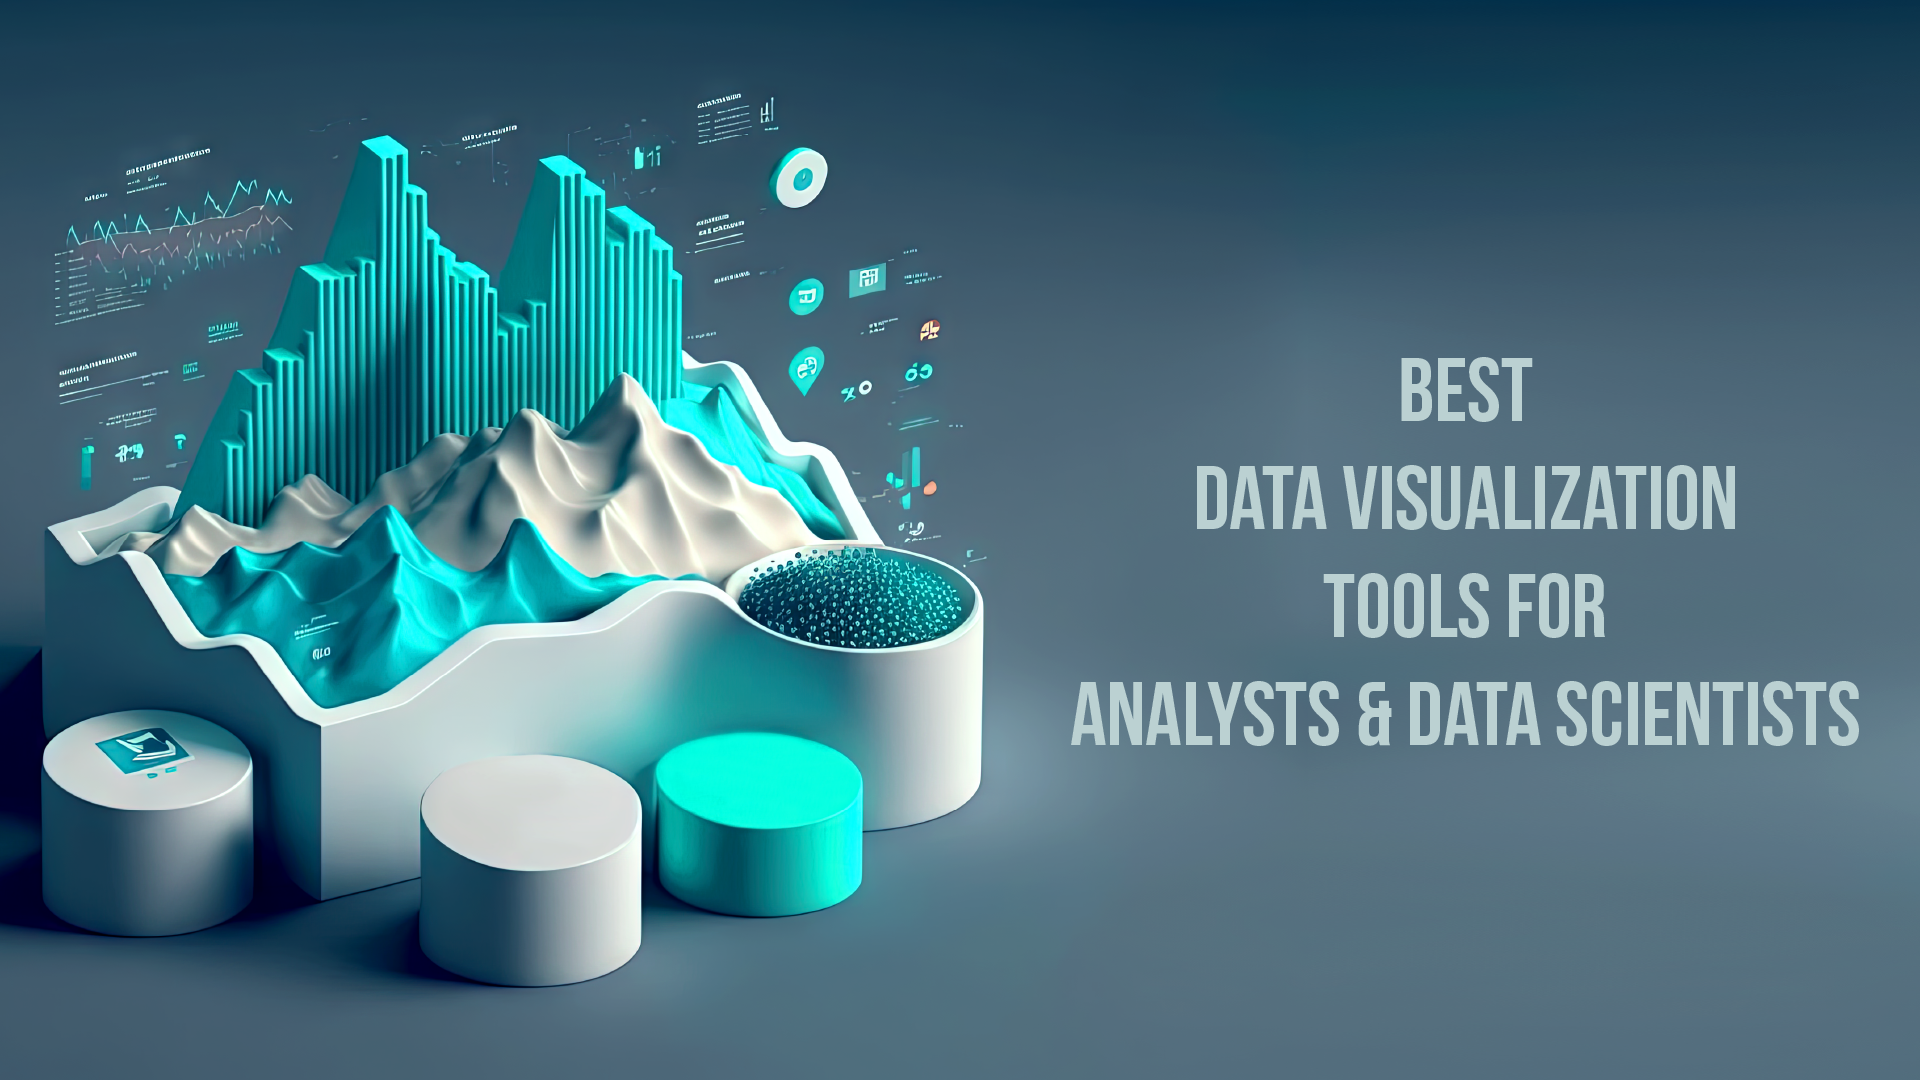 Best Data Visualization Tools for Analysts and Data Scientists